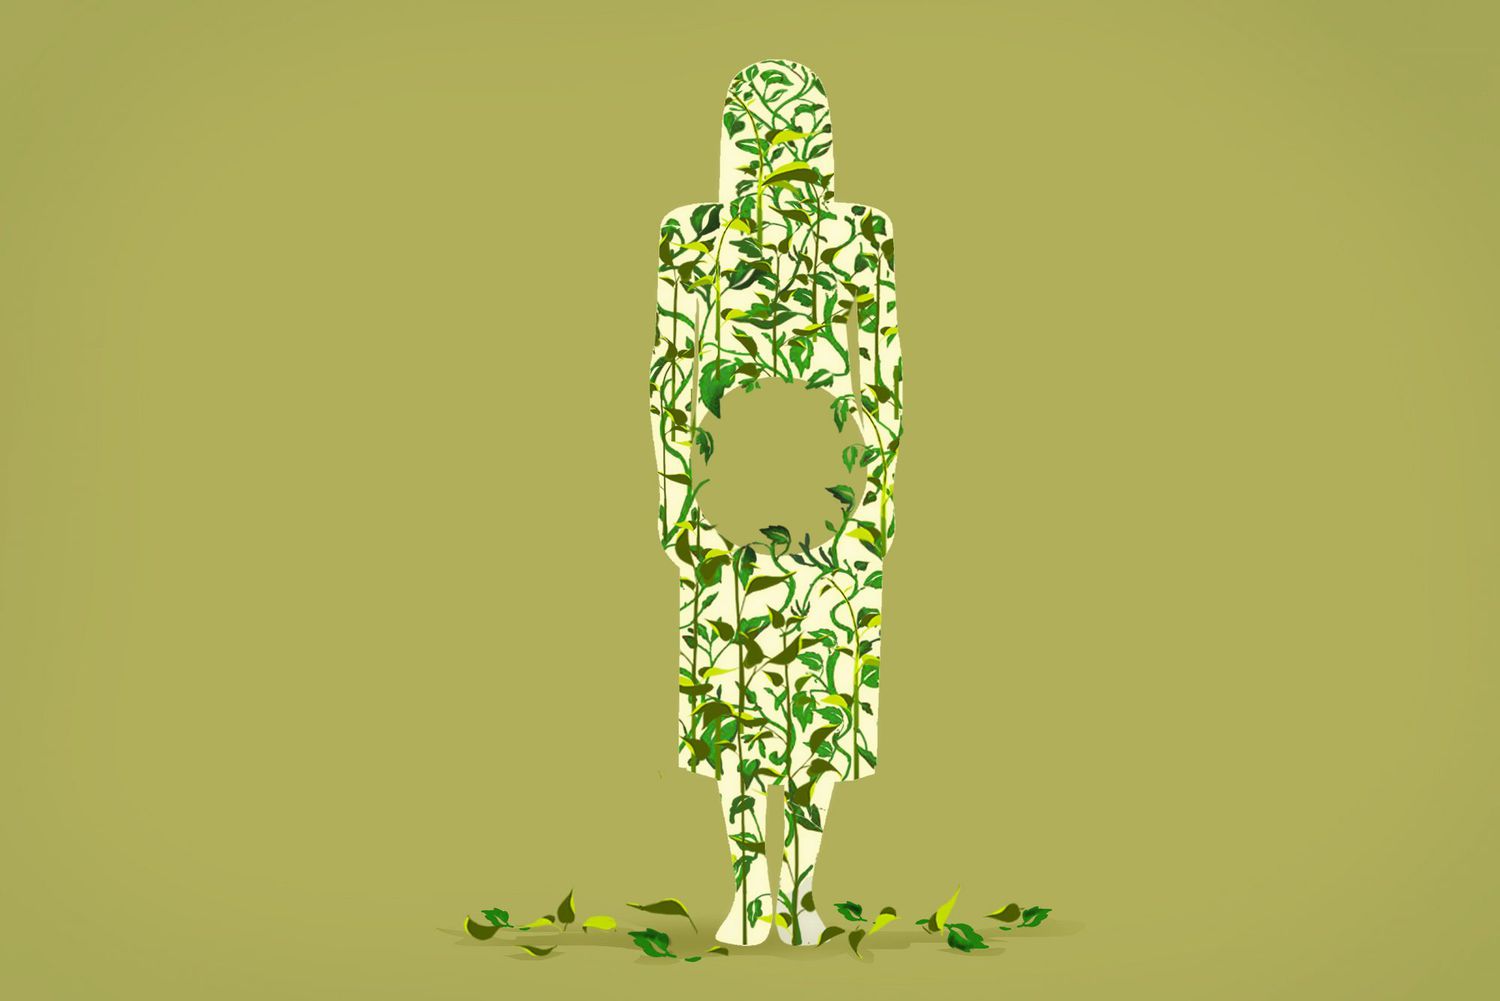 illustration of woman made out of vines with a hole in the center